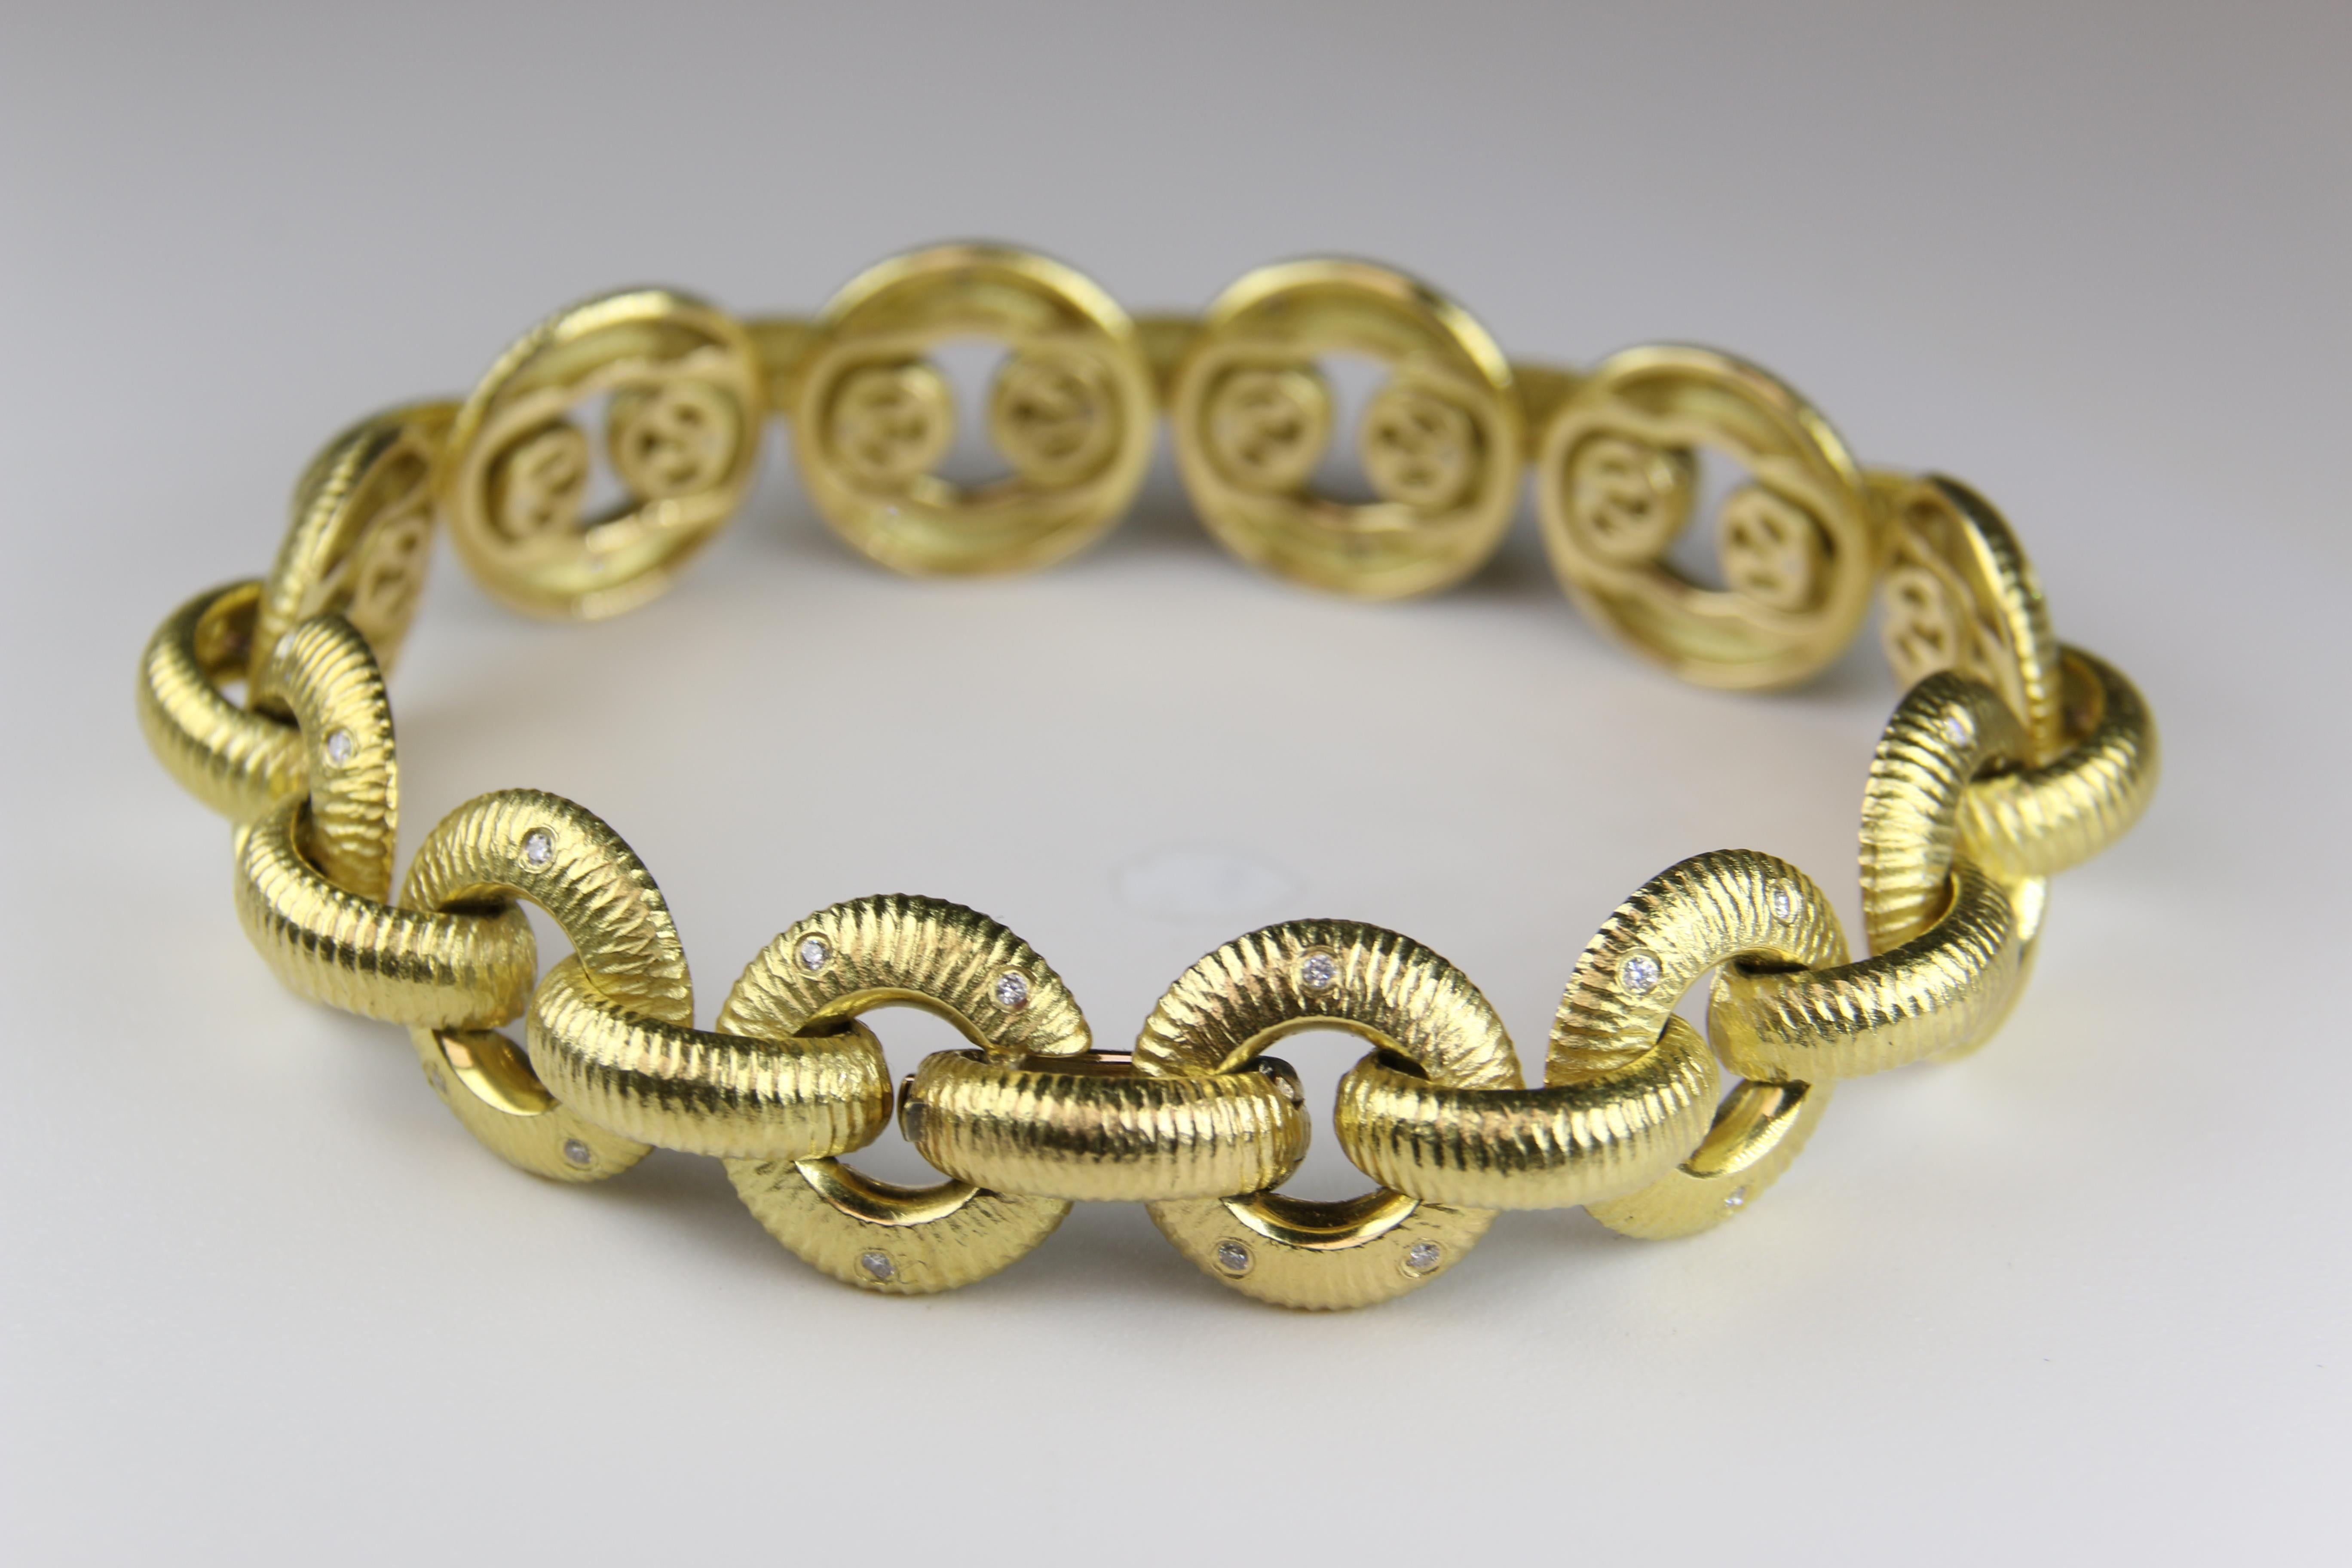 Estate Paul Morelli Ribbed Circle Diamond Bracelet in 18K Yellow Gold. Length 7 inches.  
13.5mm Wide
35.30 Grams